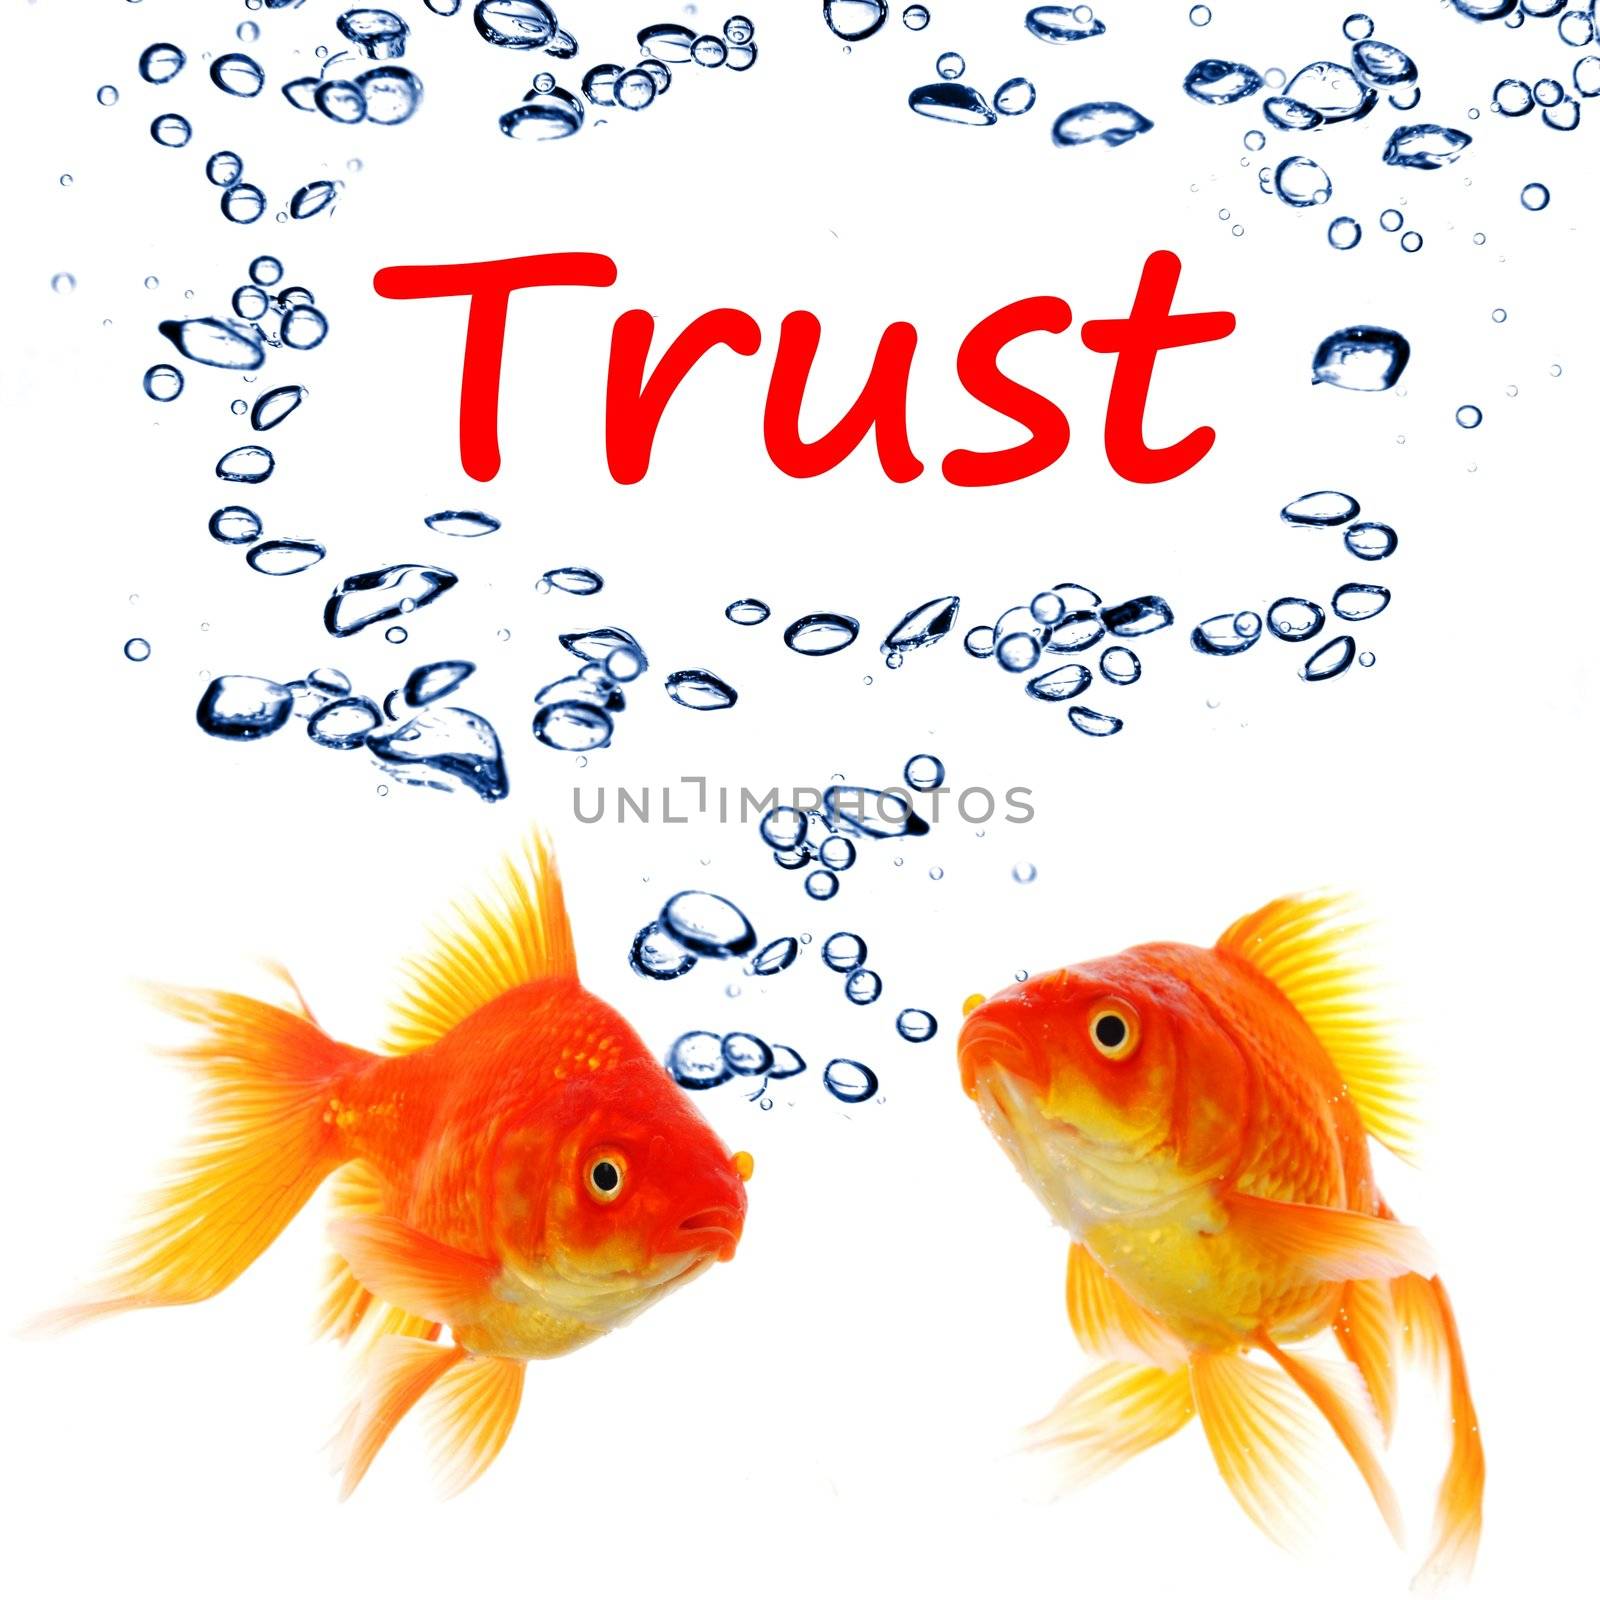 trust word and goldfish showing assurance confidence or protection concept